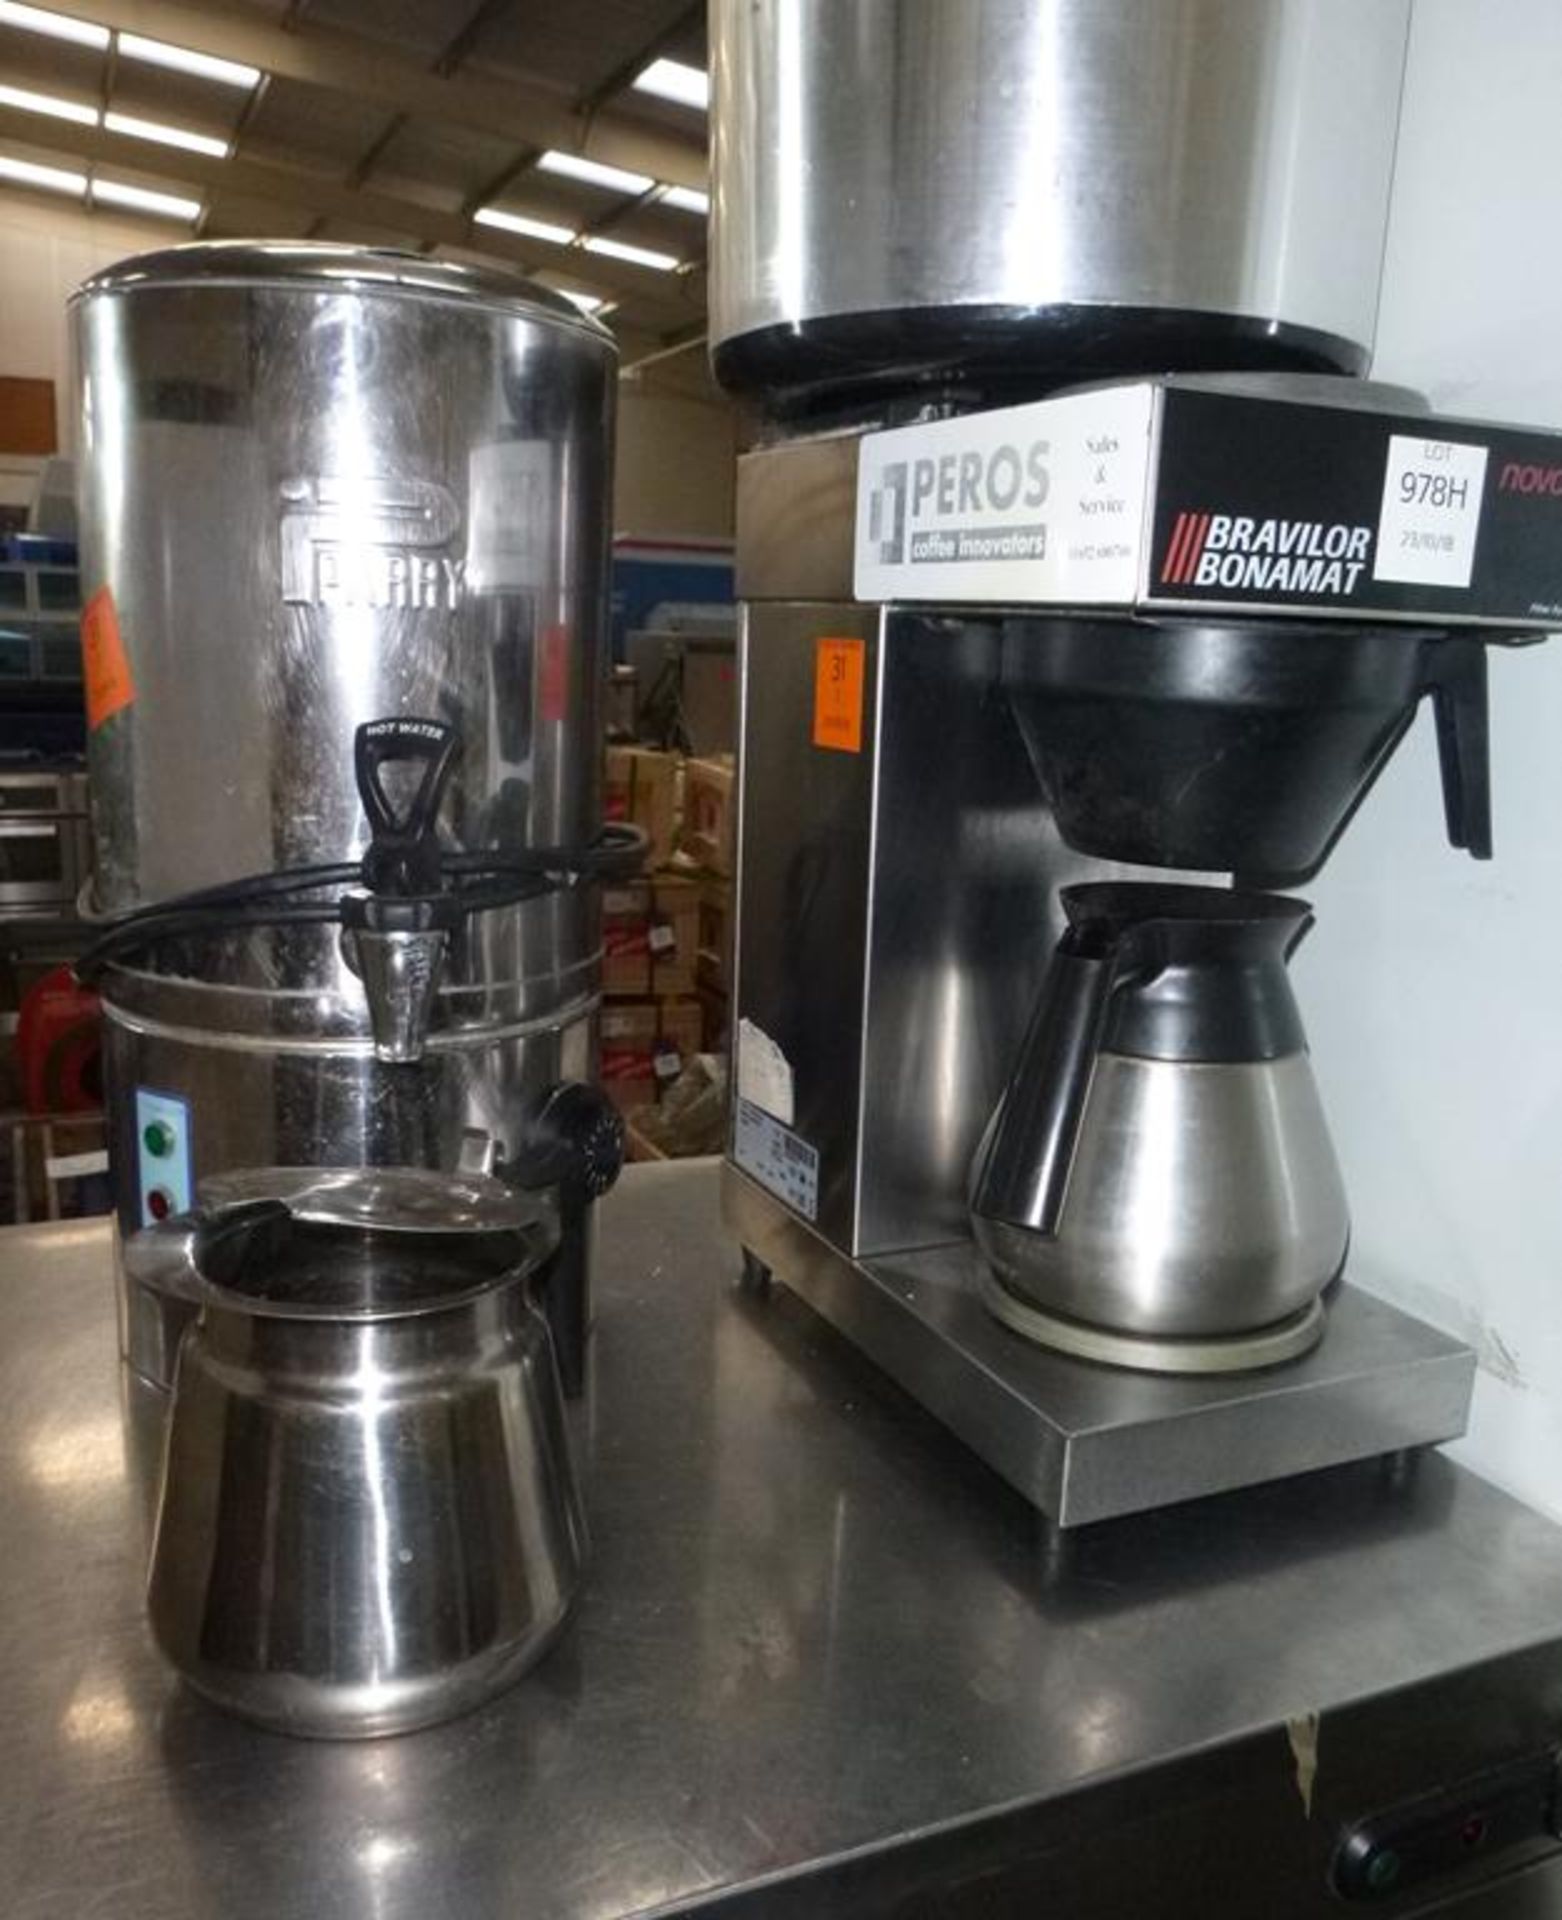 * A Bravilor Bonamat Coffee Machine and a Parry Hot Water Dispenser